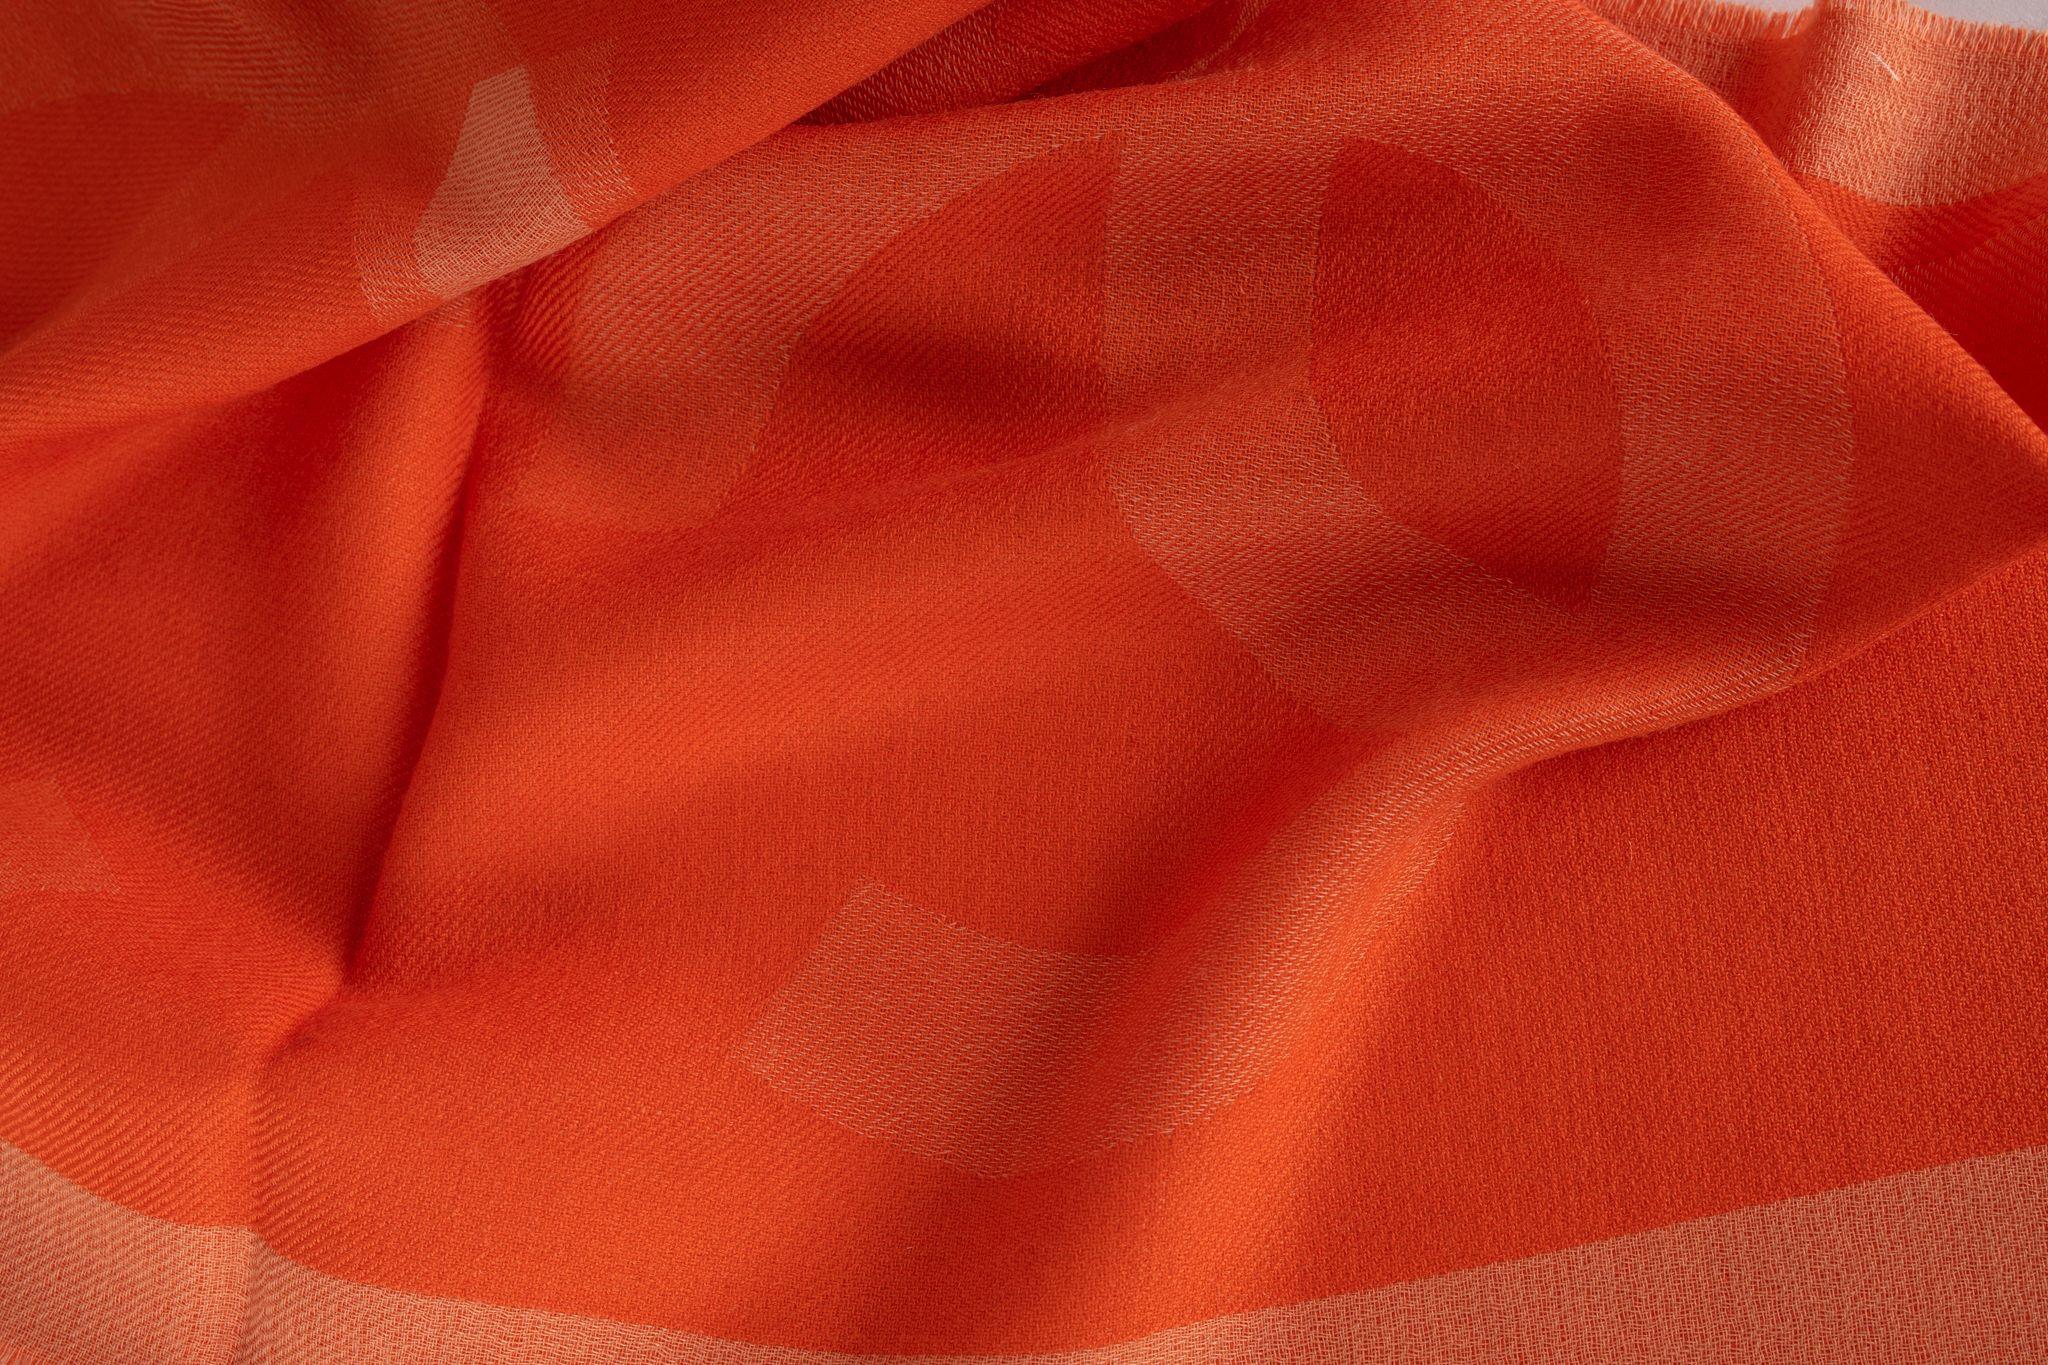 Chanel New Cashmere Shawl Orange In New Condition For Sale In West Hollywood, CA